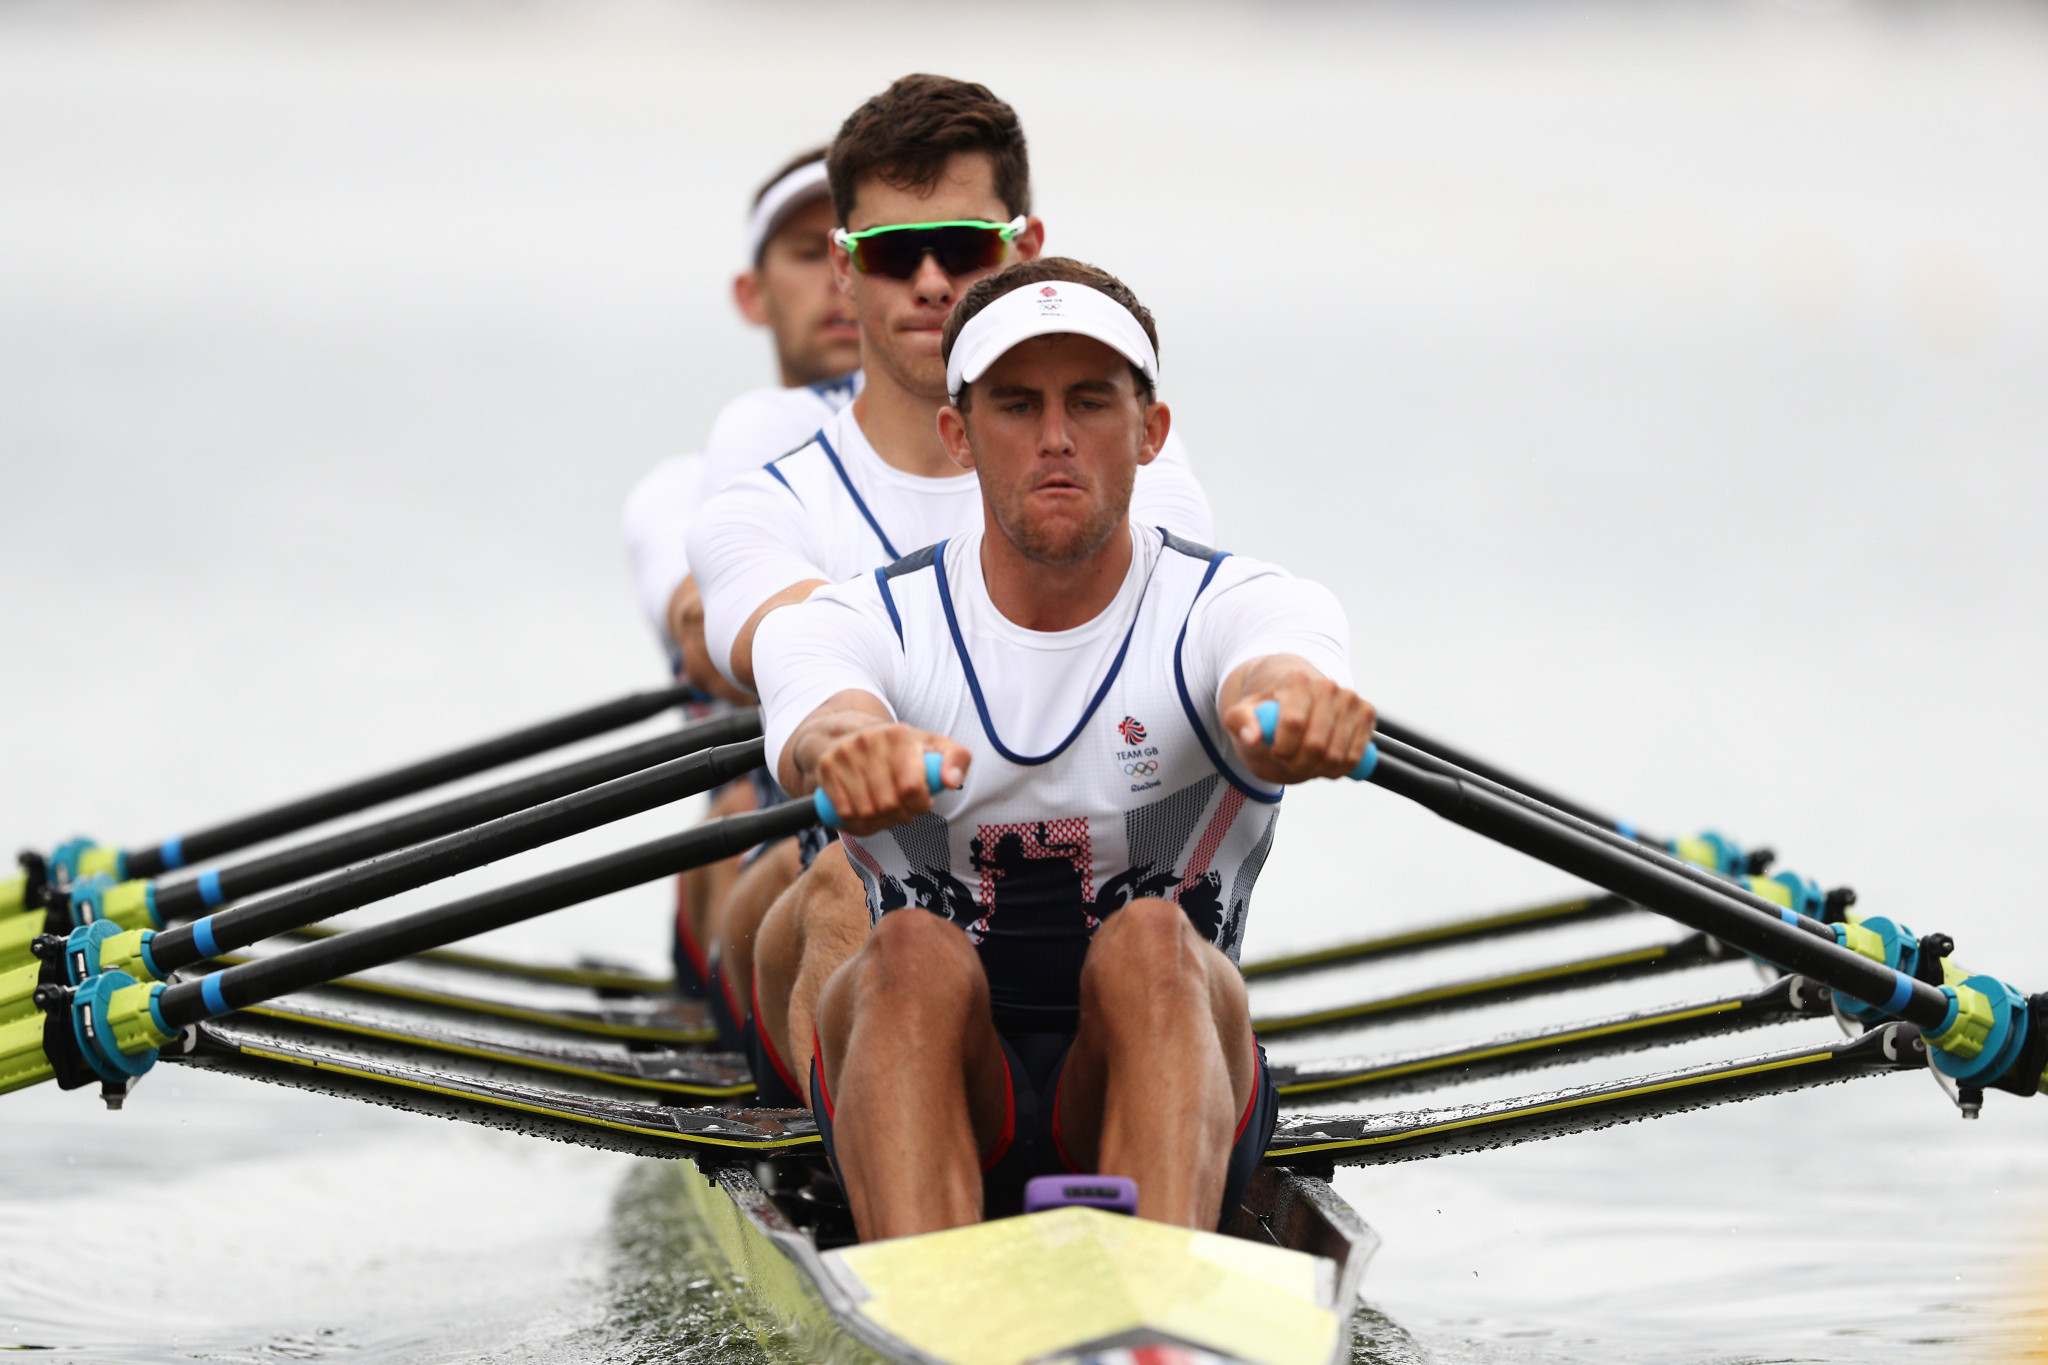 Pete Lambert competed at the Rio 2016 Olympic Games in the quadruple sculls event ©Getty Images 